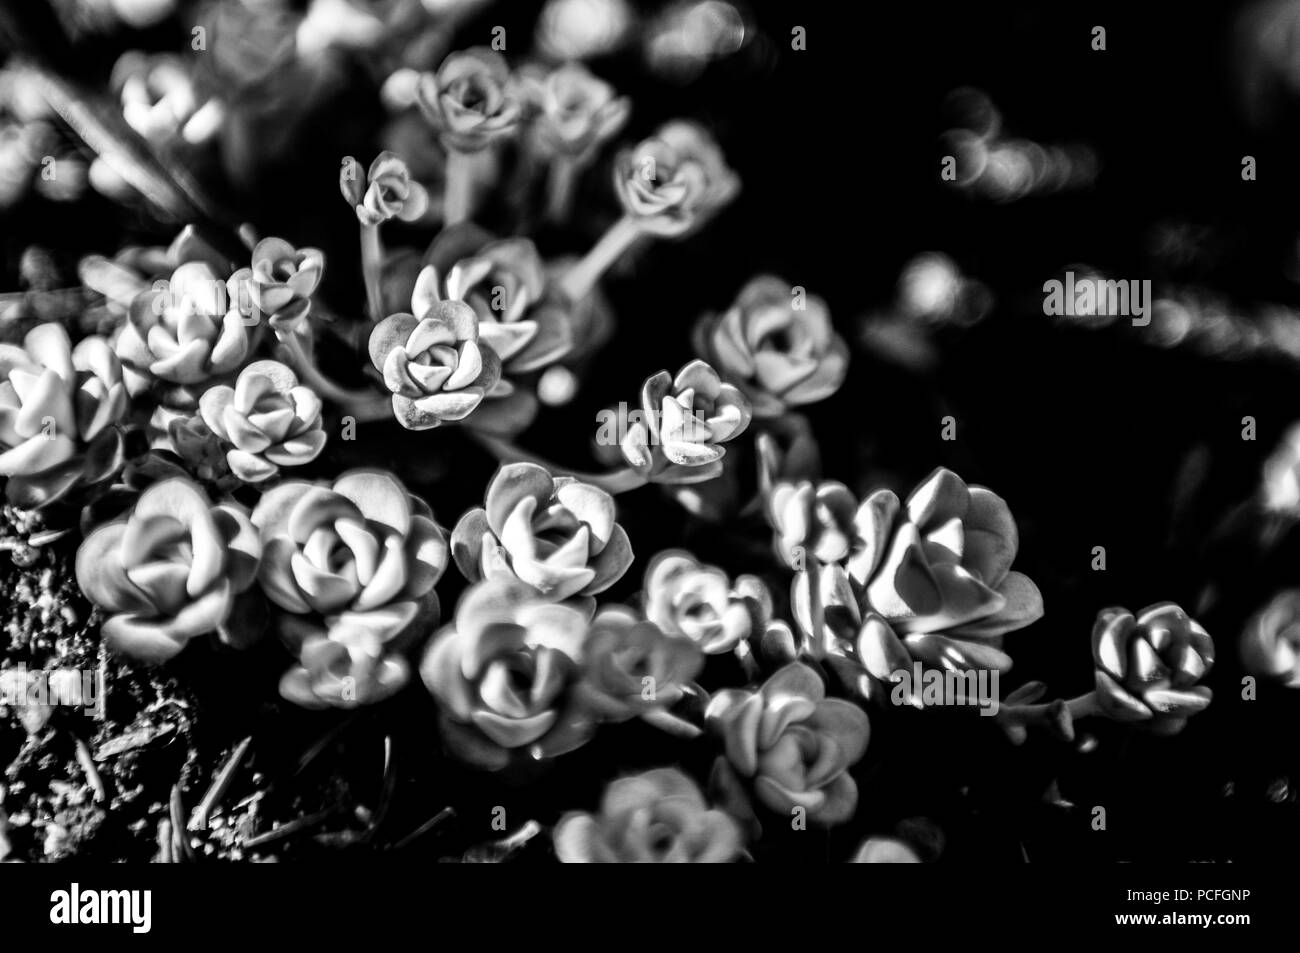 Succulent for display Black and White Stock Photos & Images - Alamy